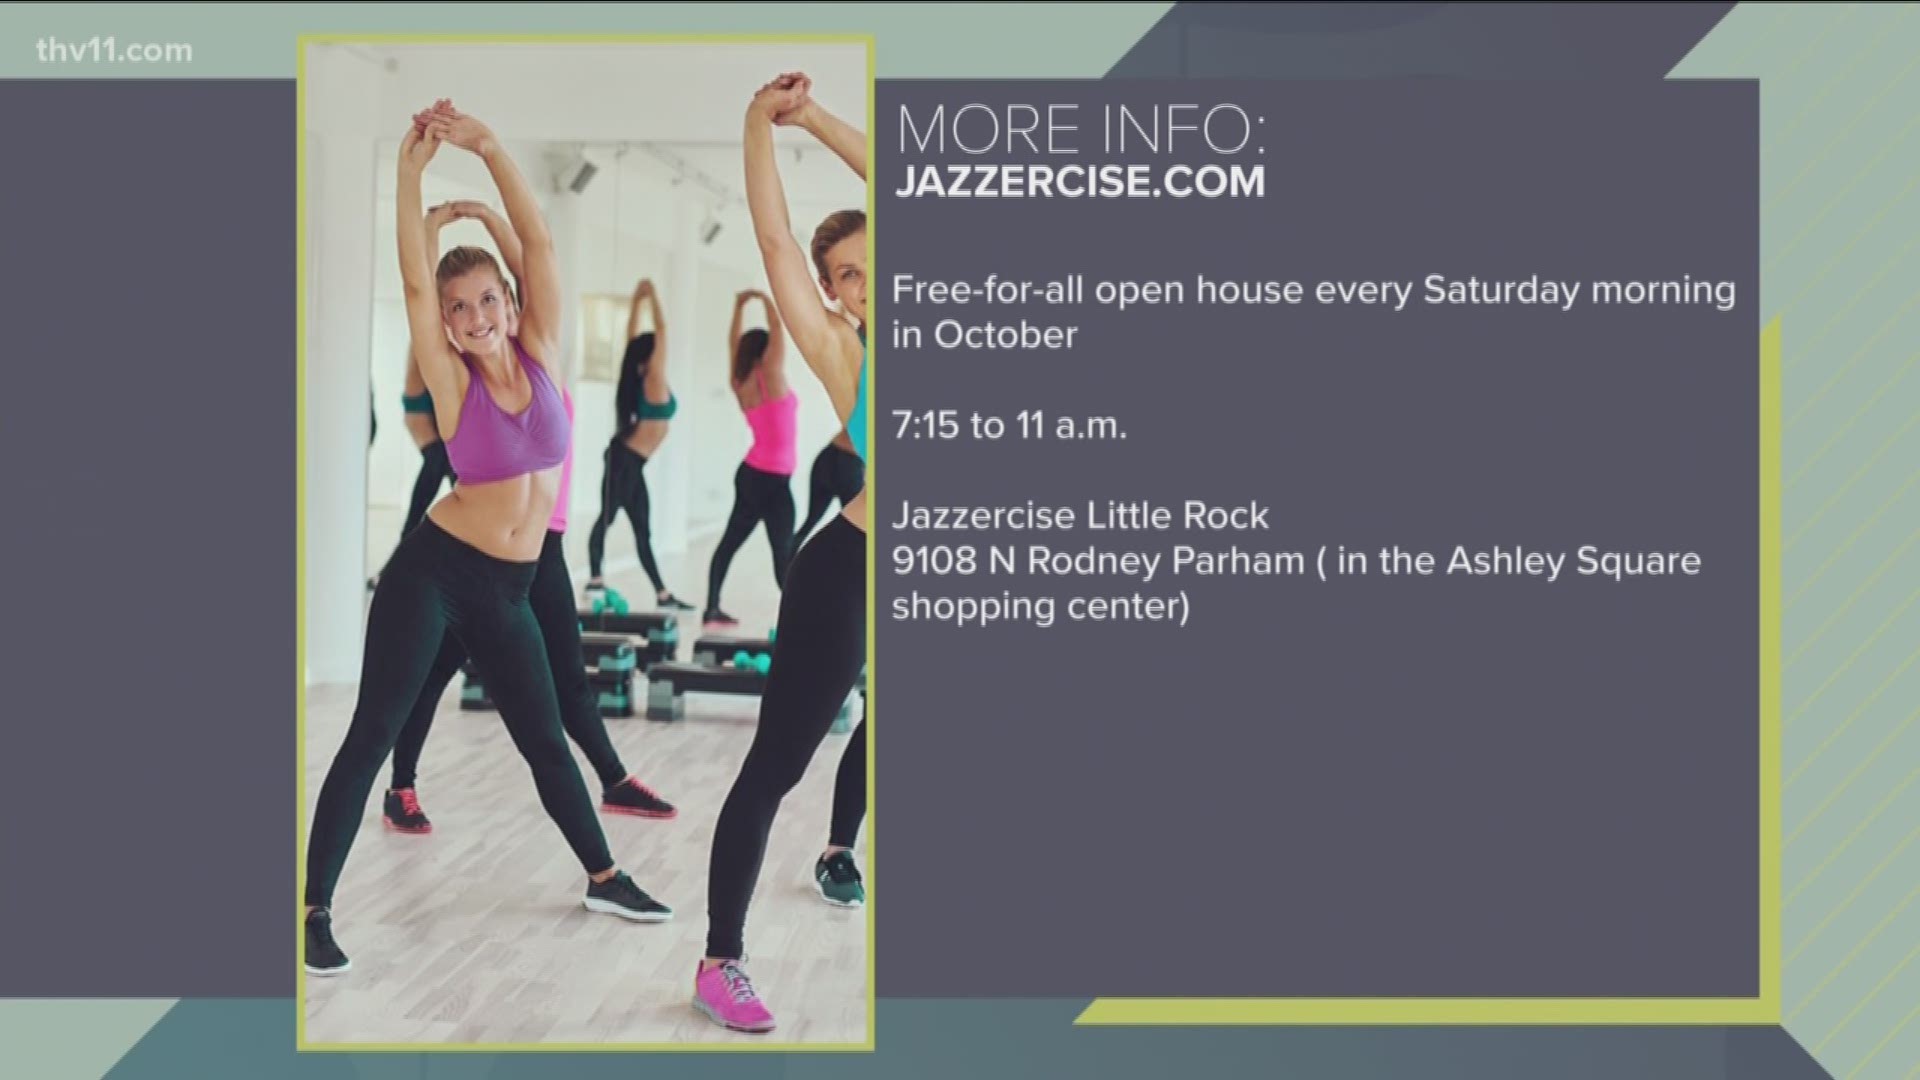 Jazzercise Little Rock Fitness Center is holding a citywide free-for-all open house every Saturday morning for the rest of October to celebrate the 50th anniversary!